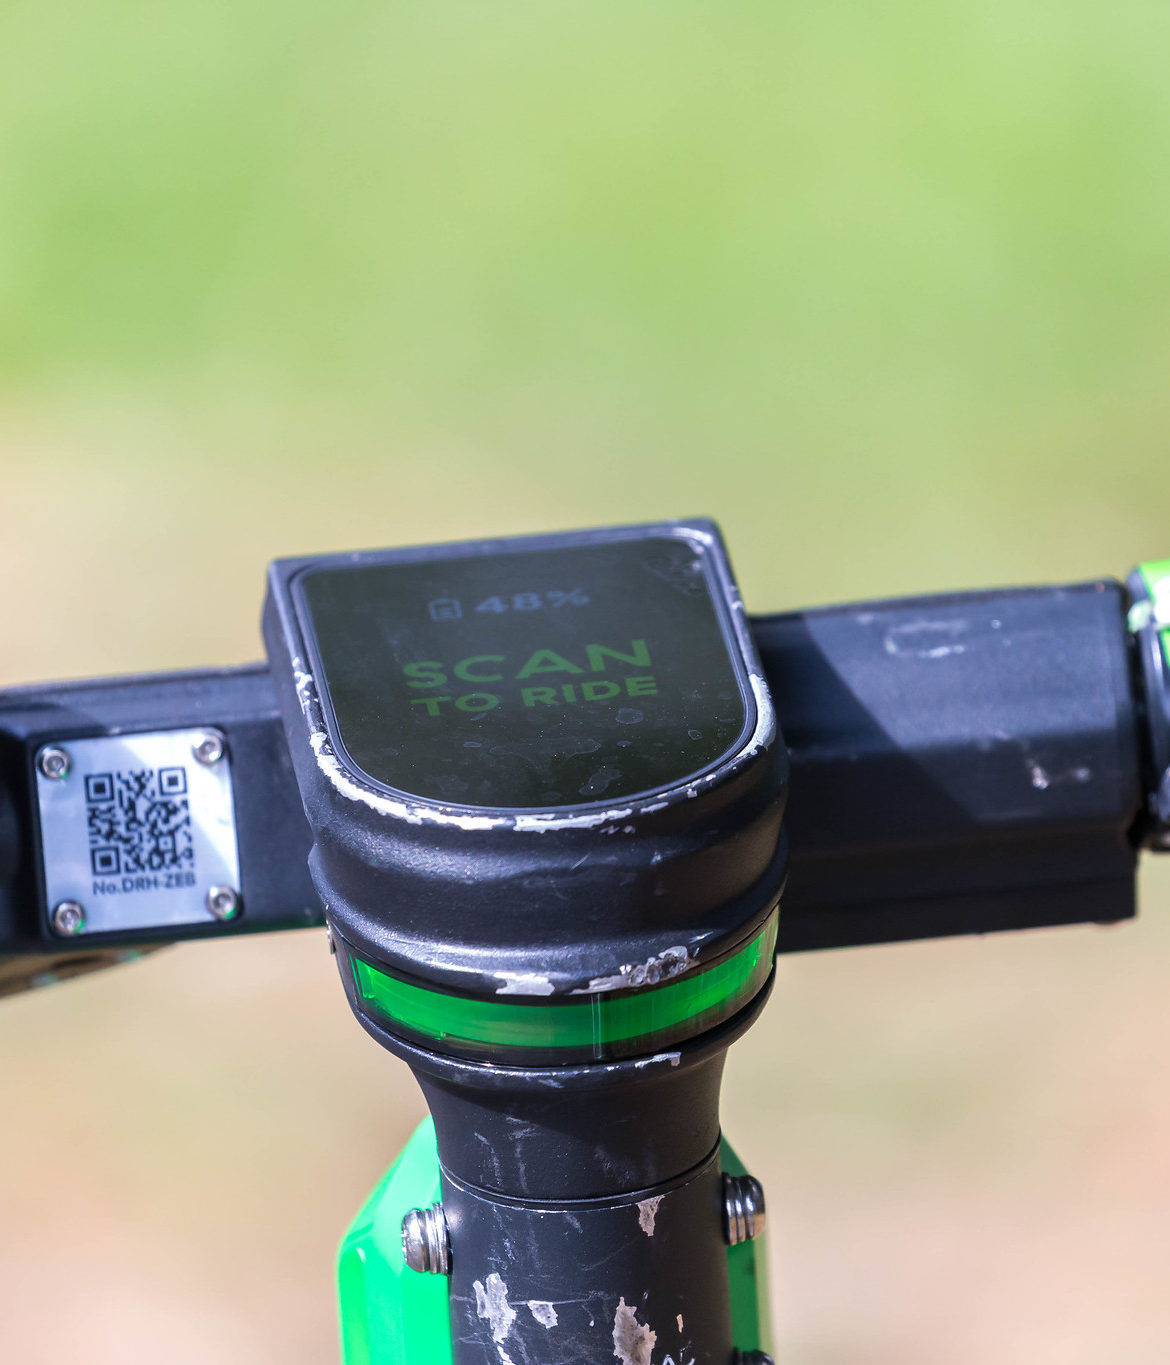 A close-up of the handlebars of a Lime electric scooter. The scooter has a small computer screen that reads "Scan to Ride". To the right of the screen is a QR code.